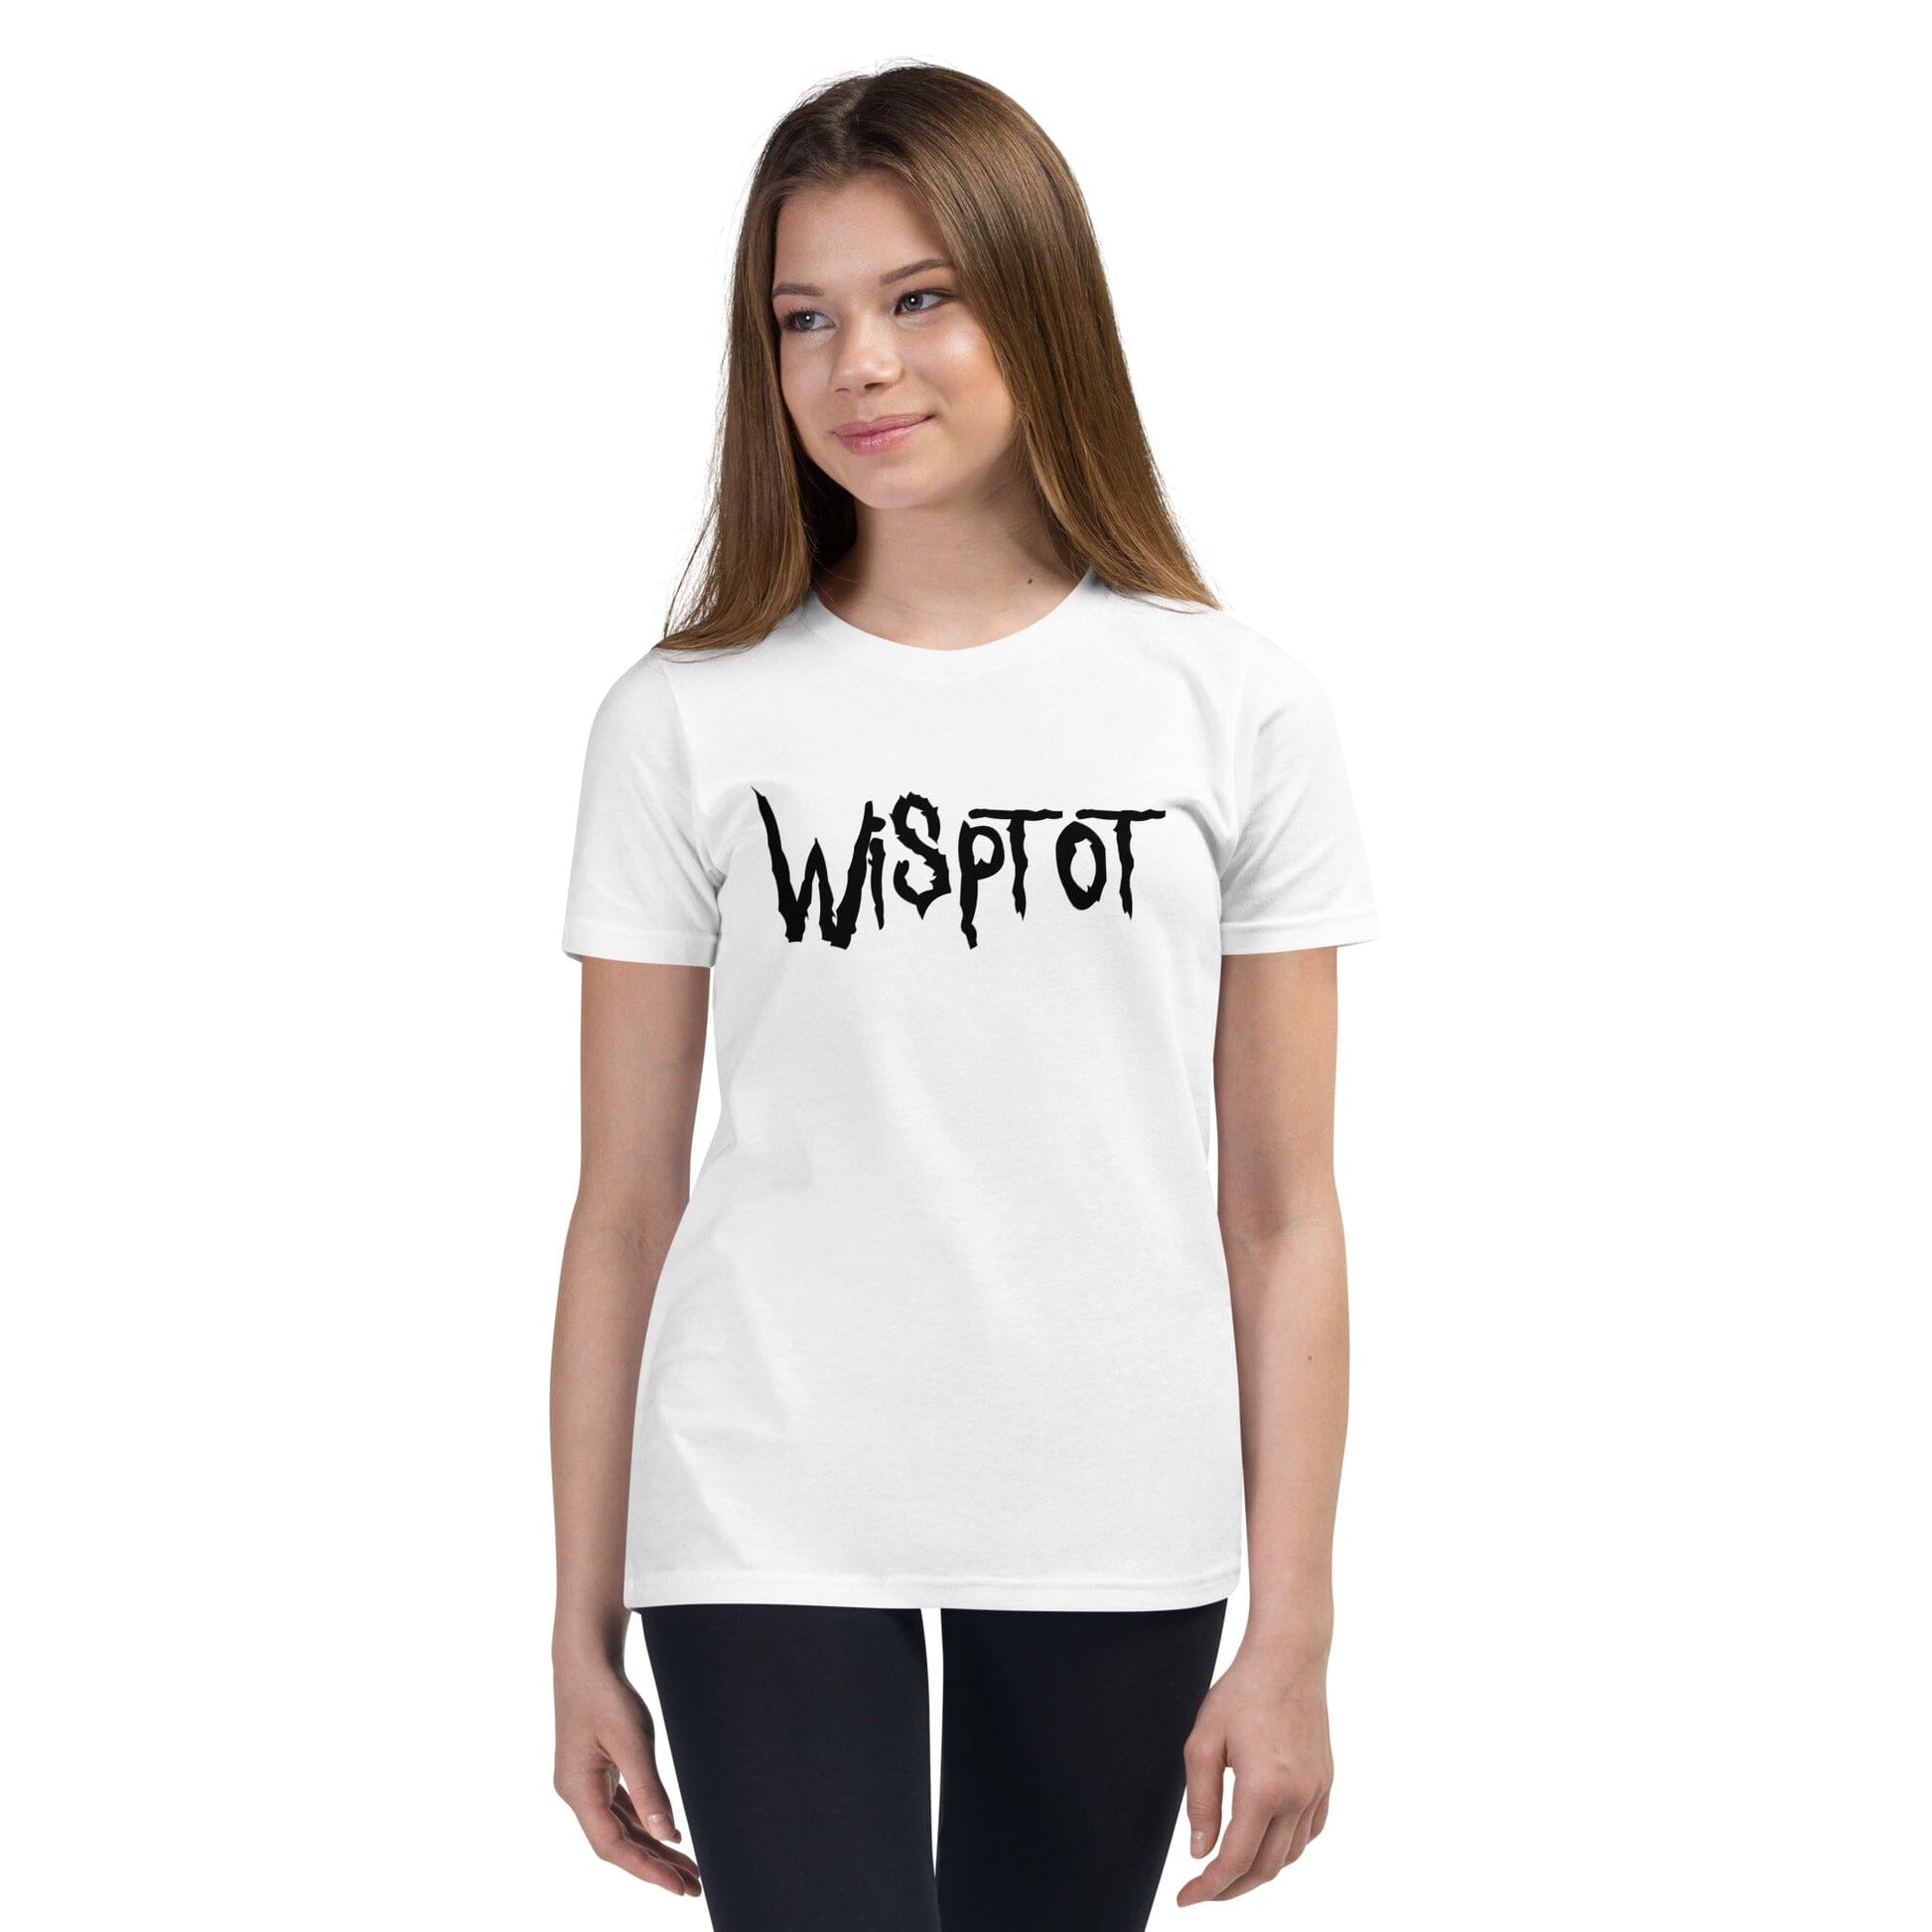 WispTot YOUTH T-Shirt [Unfoiled] (All net proceeds go to equally to Kitty CrusAIDe and Rags to Riches Animal Rescue) JoyousJoyfulJoyness White S 